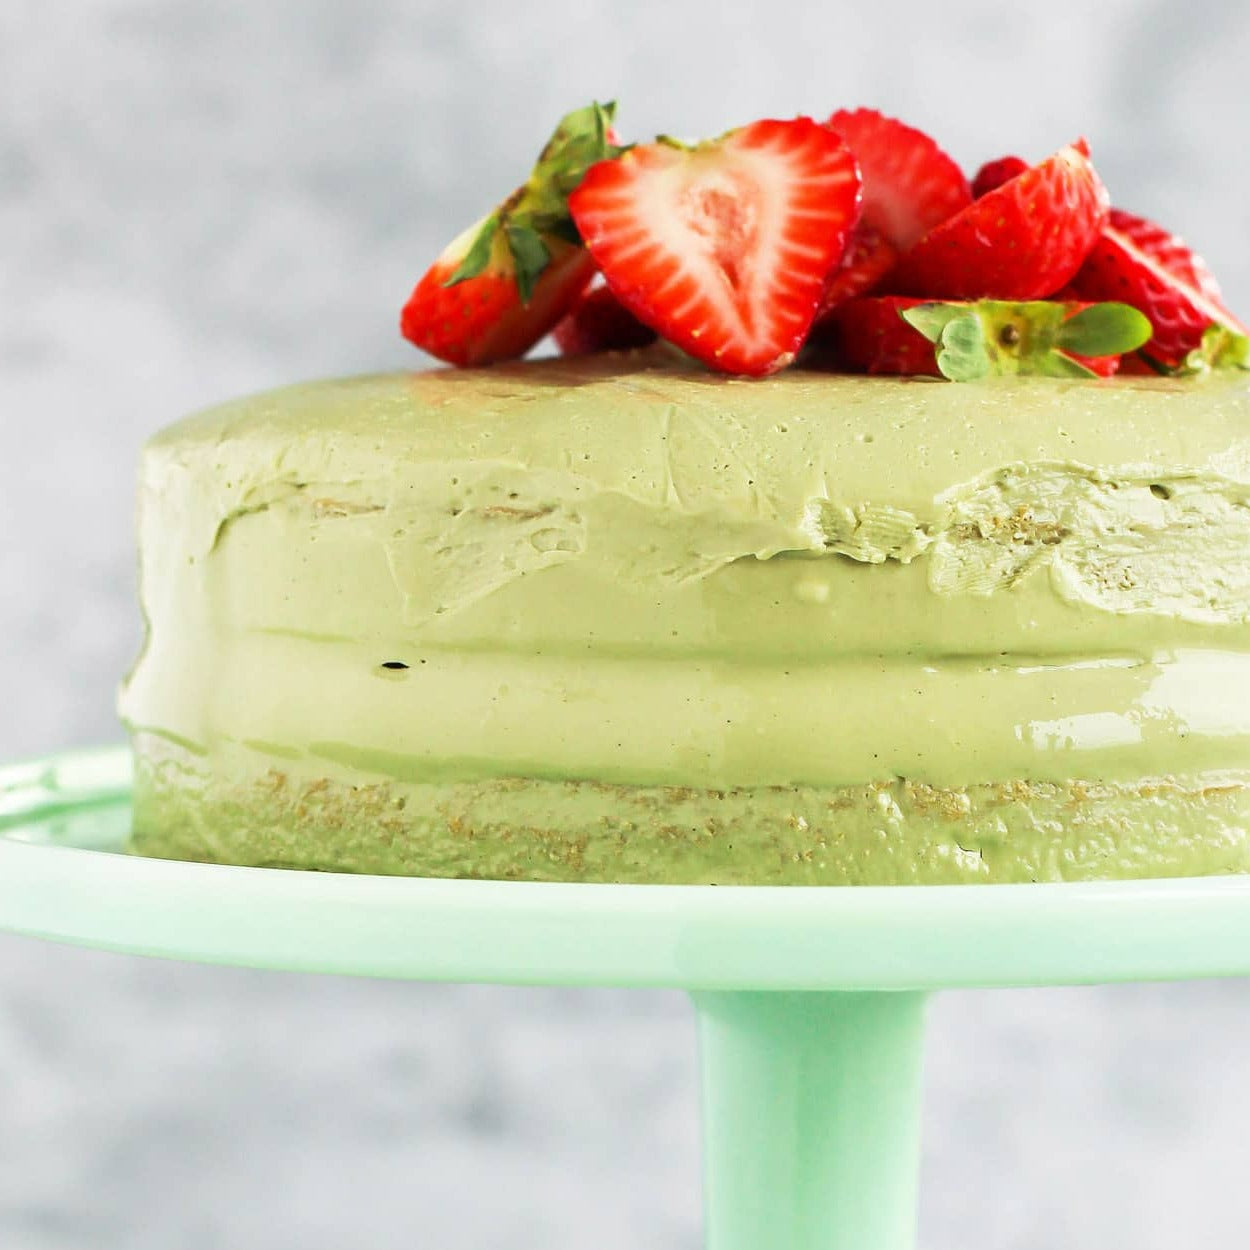 This matcha strawberry cake is made with soft matcha vanilla sponge cake, finished with creamy matcha ganache and decadently topped with fresh strawberries. A great gift for a family or a treat for a special someone to enjoy over and over. Delivered to you across Dubai and the UAE.